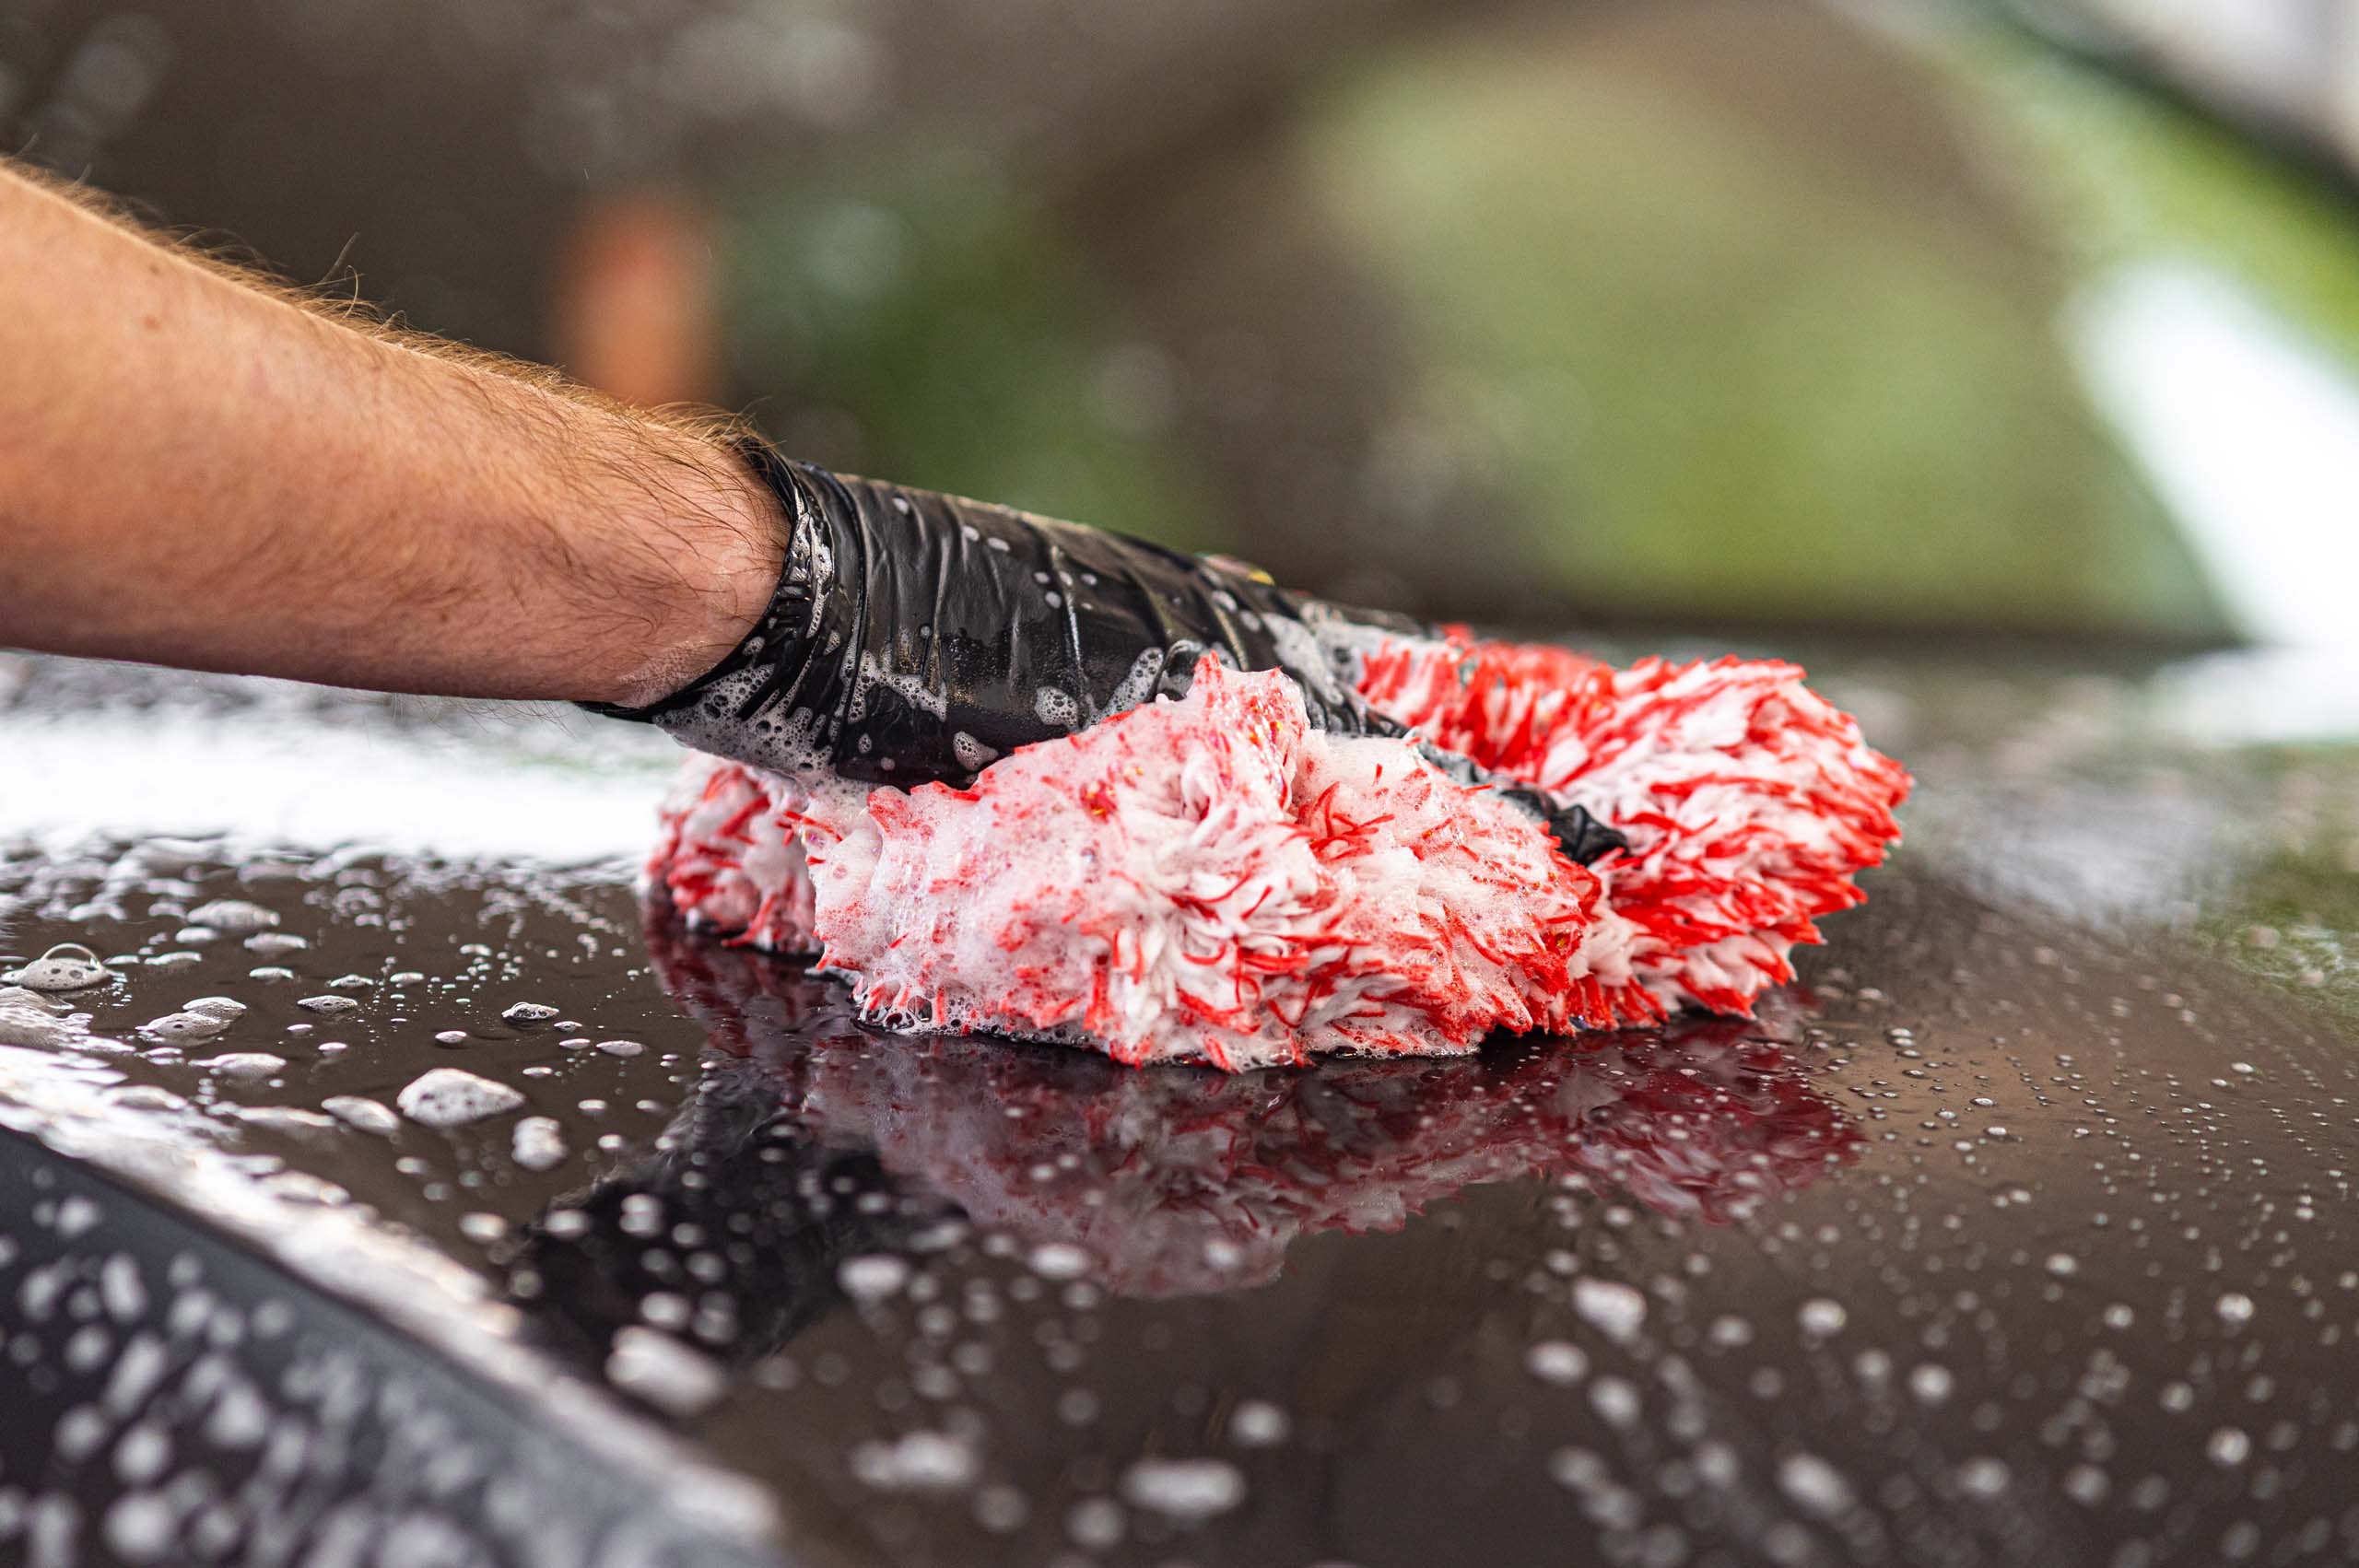 The best uses for our car cleaner kit